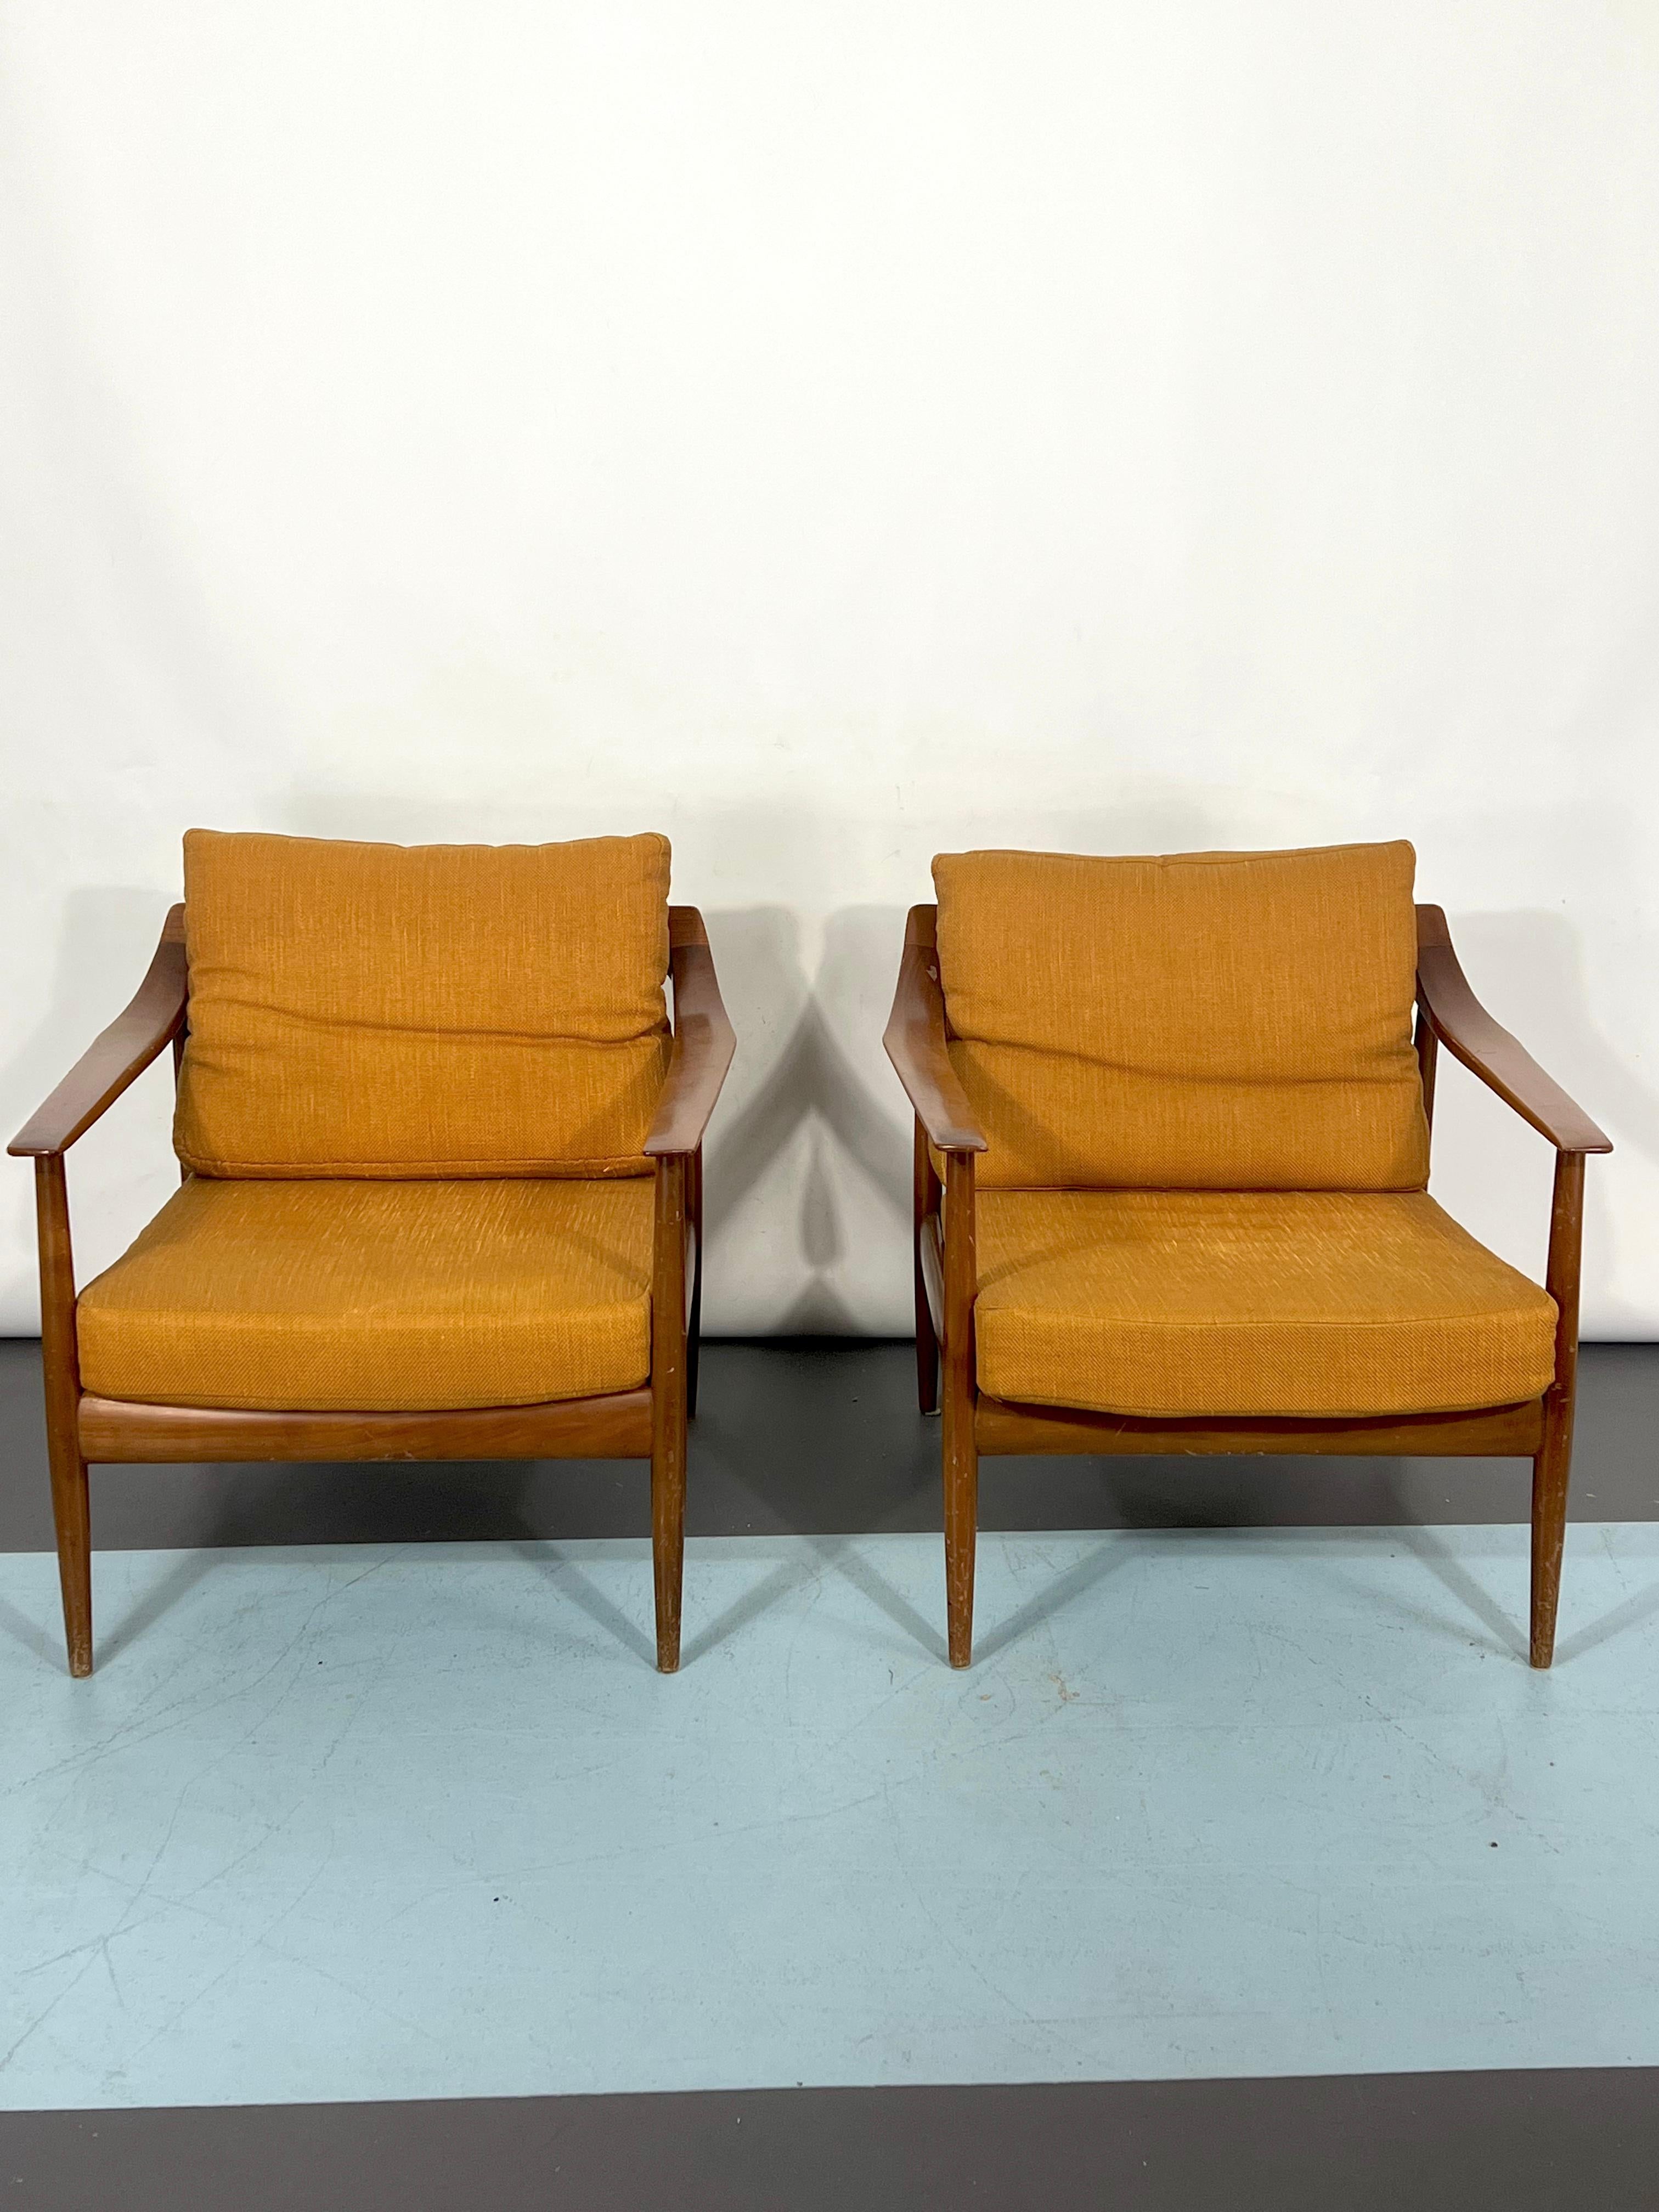 Good vintage condition with trace of age and use for this set of two rosewood armchairs designed by Walter Knoll and produced in Germany during the 50s.